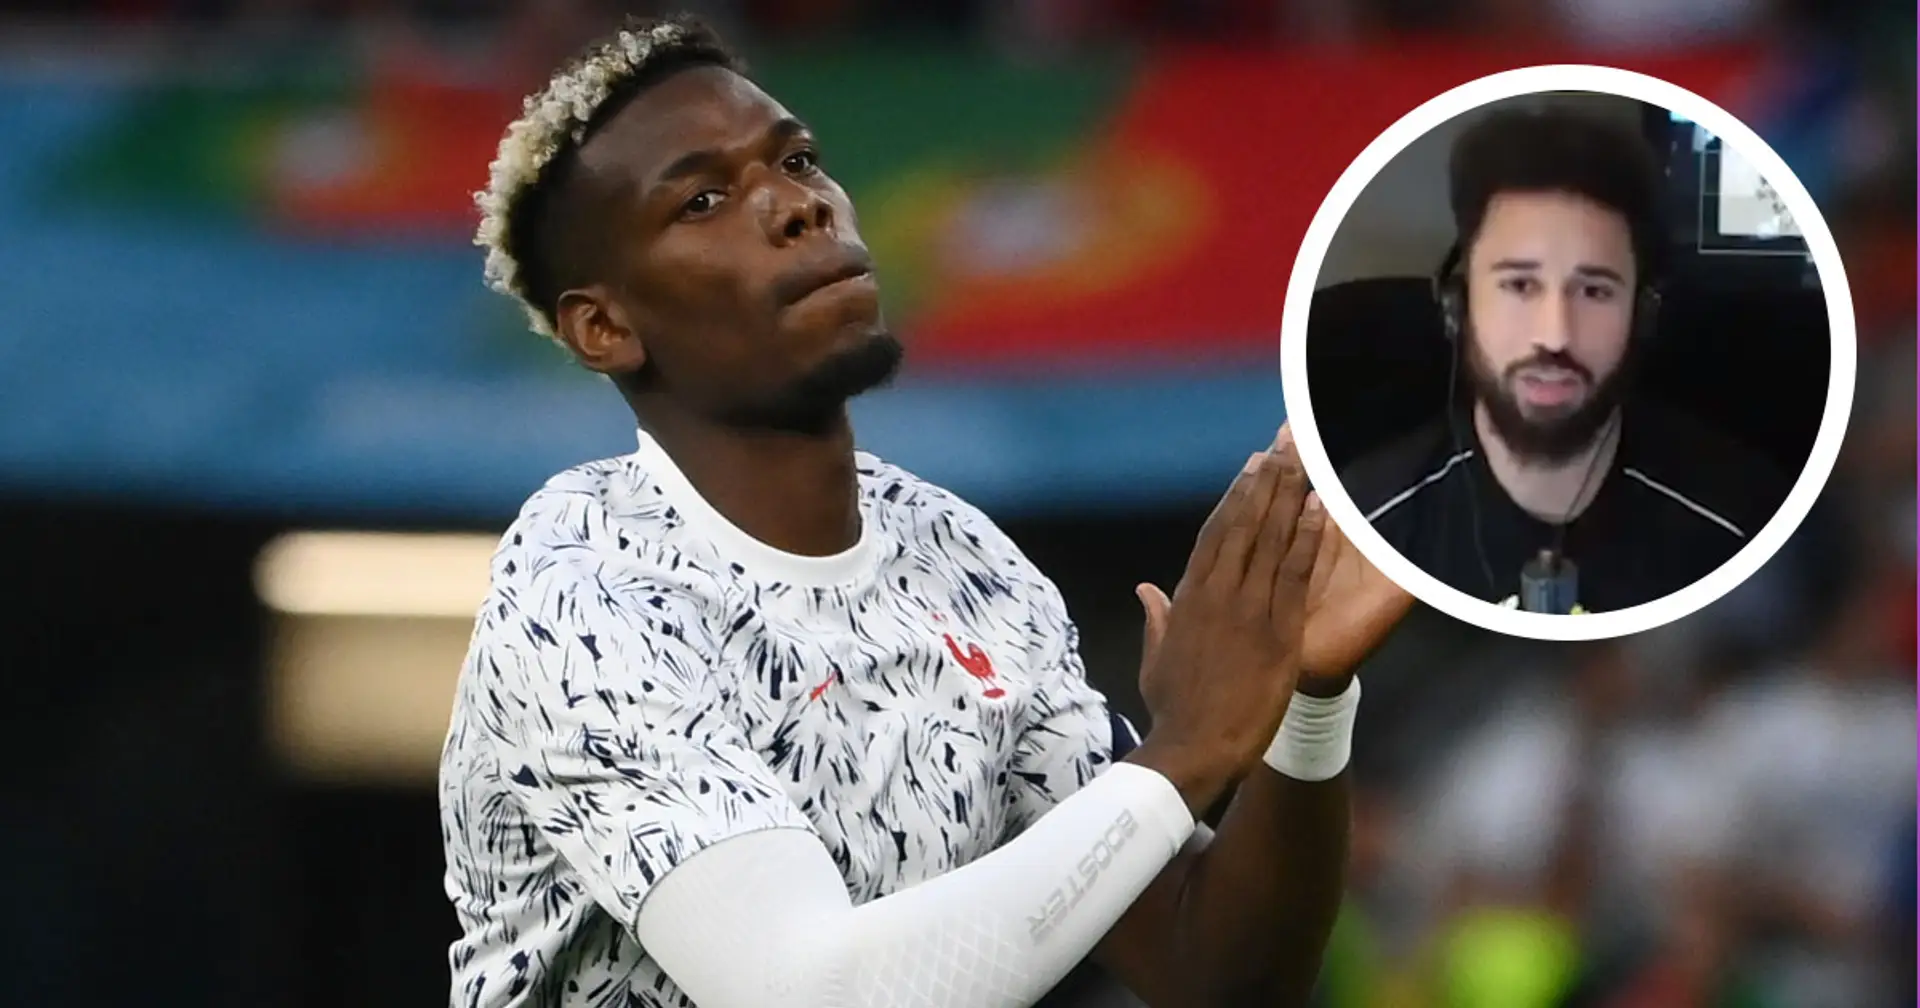 'We don't respect him enough': Crystal Palace star Andros Townsend labels Pogba as the best player of the Euros